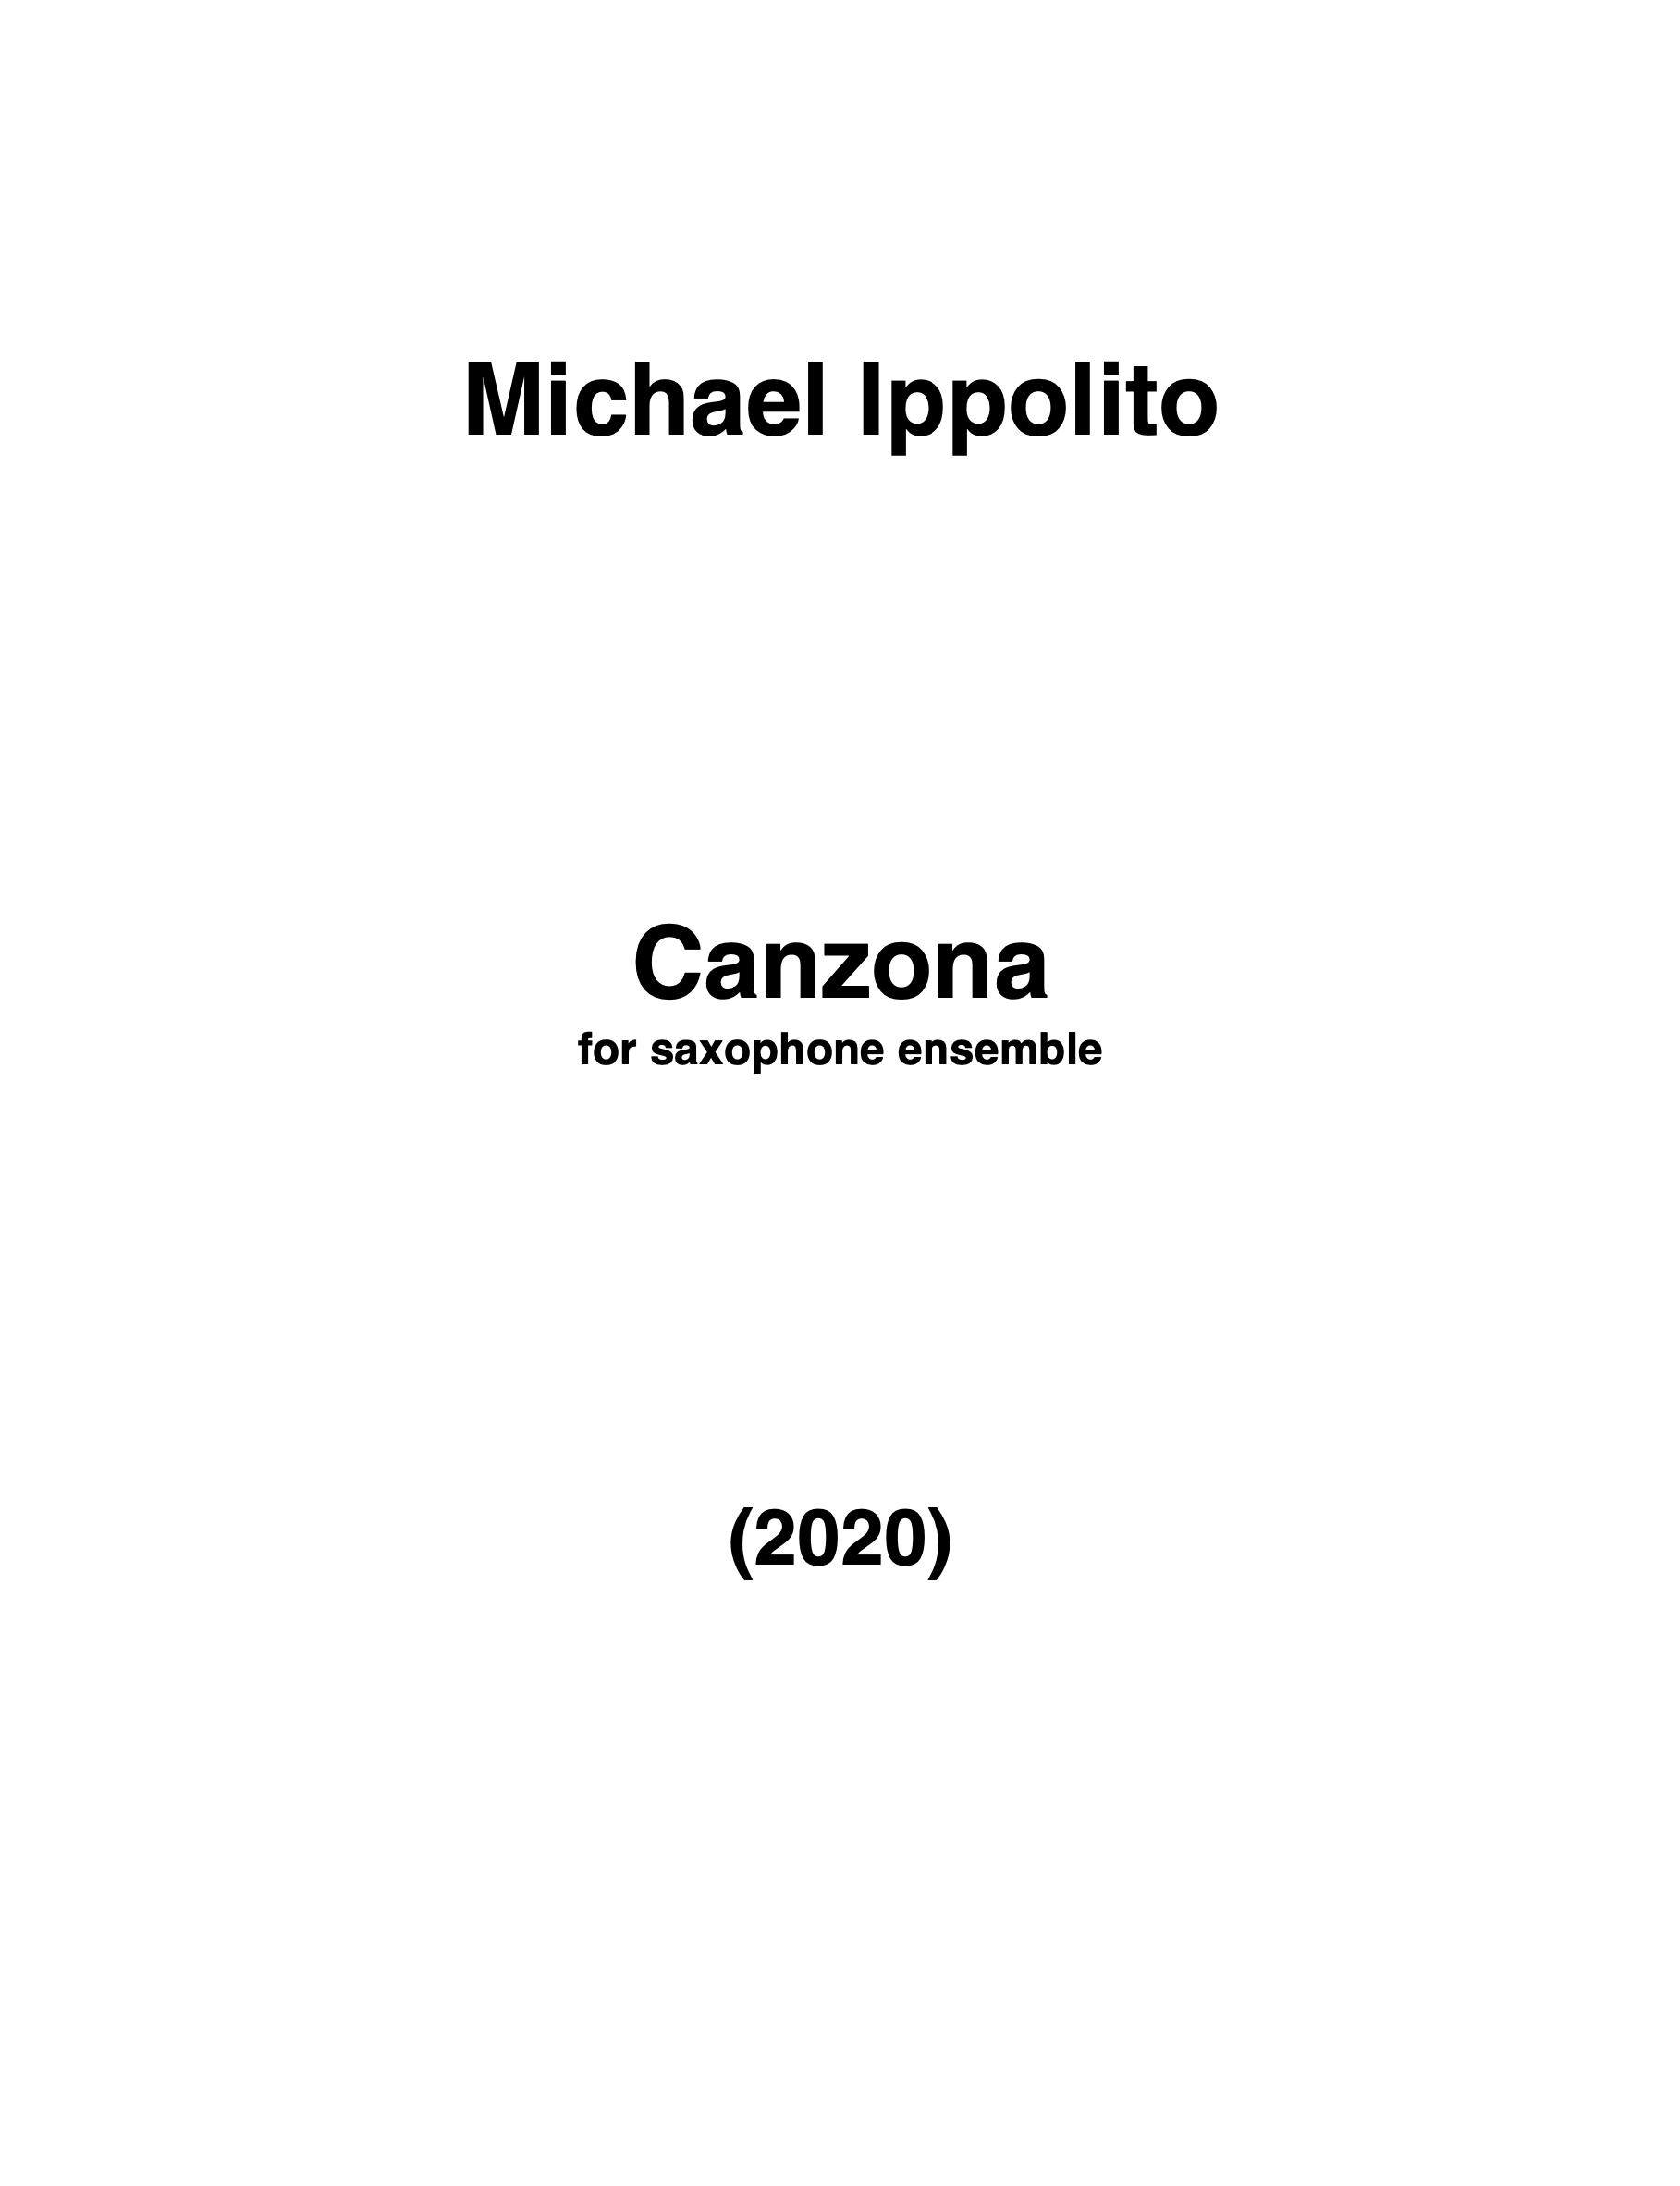 Canzona by Michael Ippolito